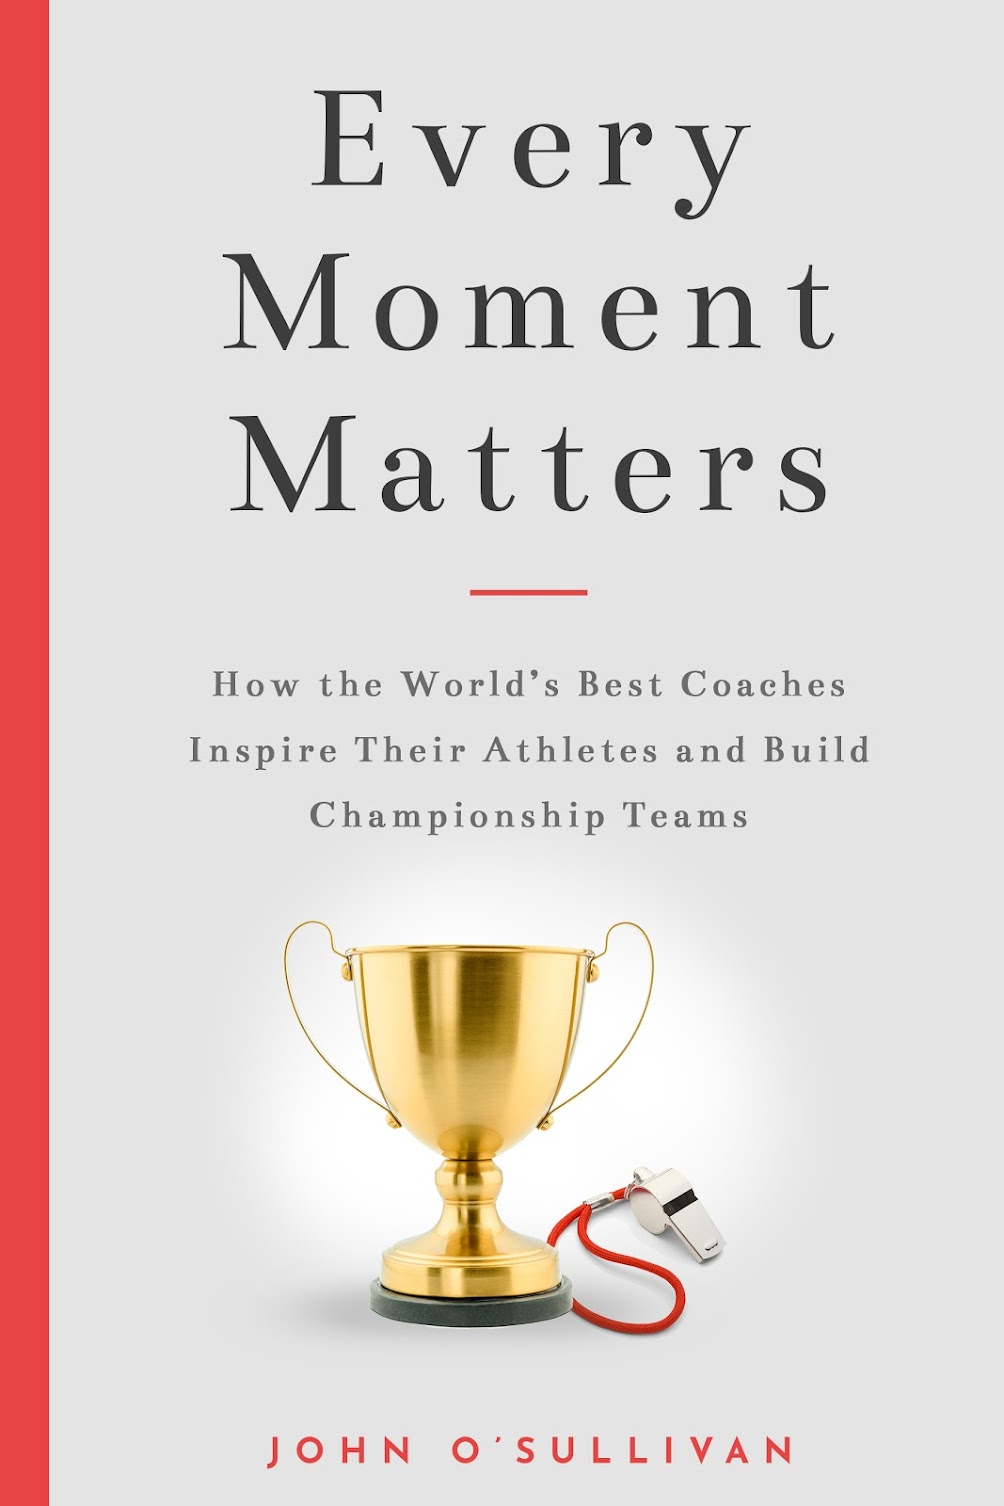 One of the best baseball coach gift ideas is a book on leadership or championship mindset.